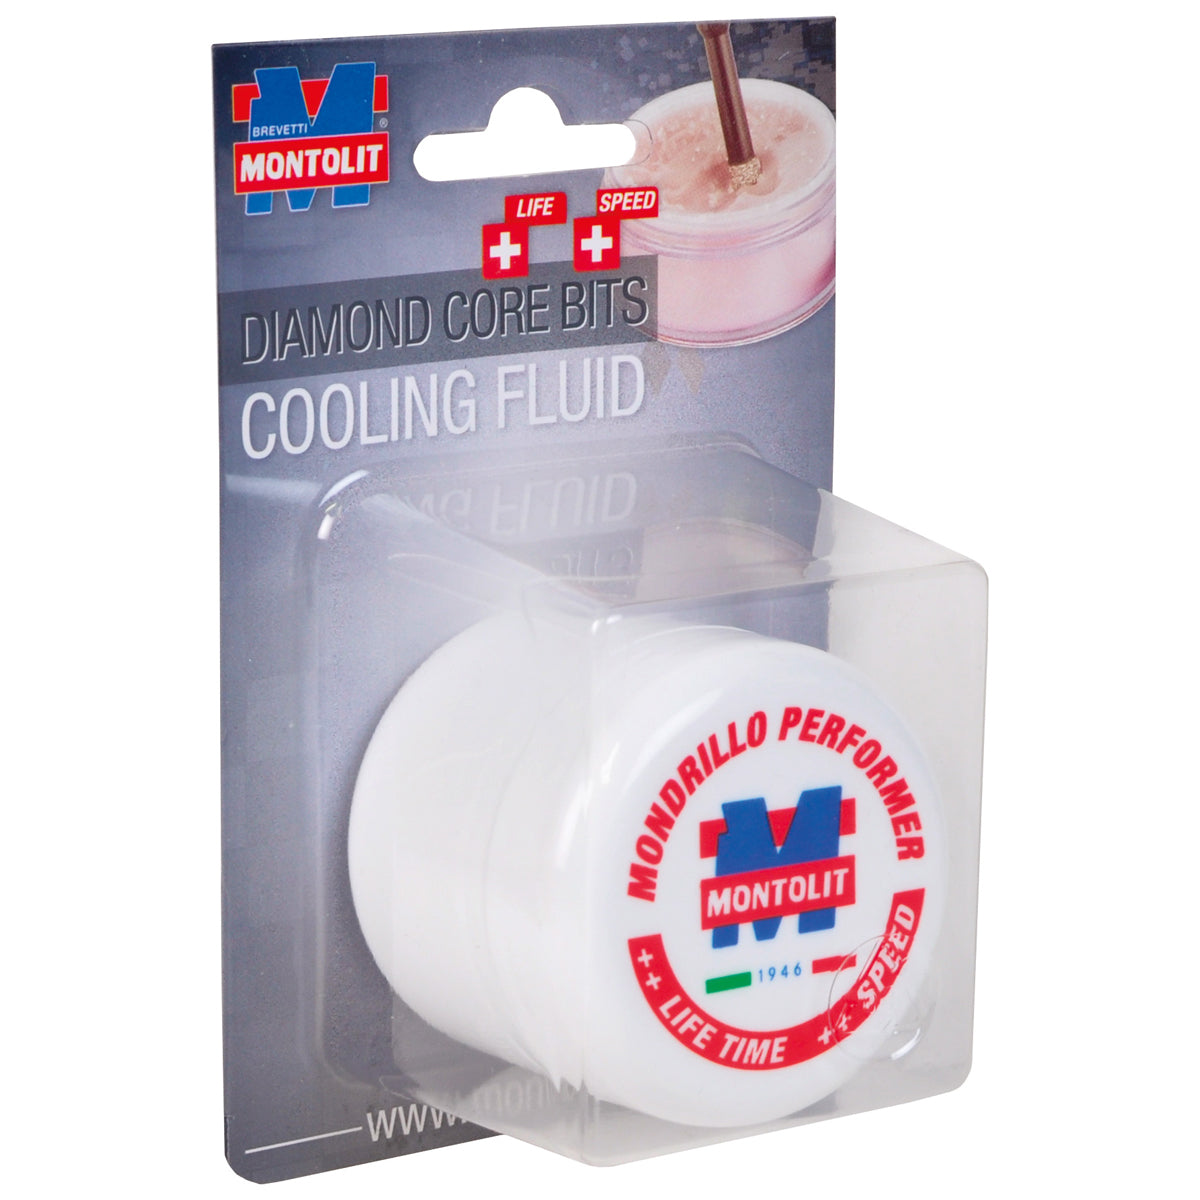 Cooling Fluid for Diamond Core Bits